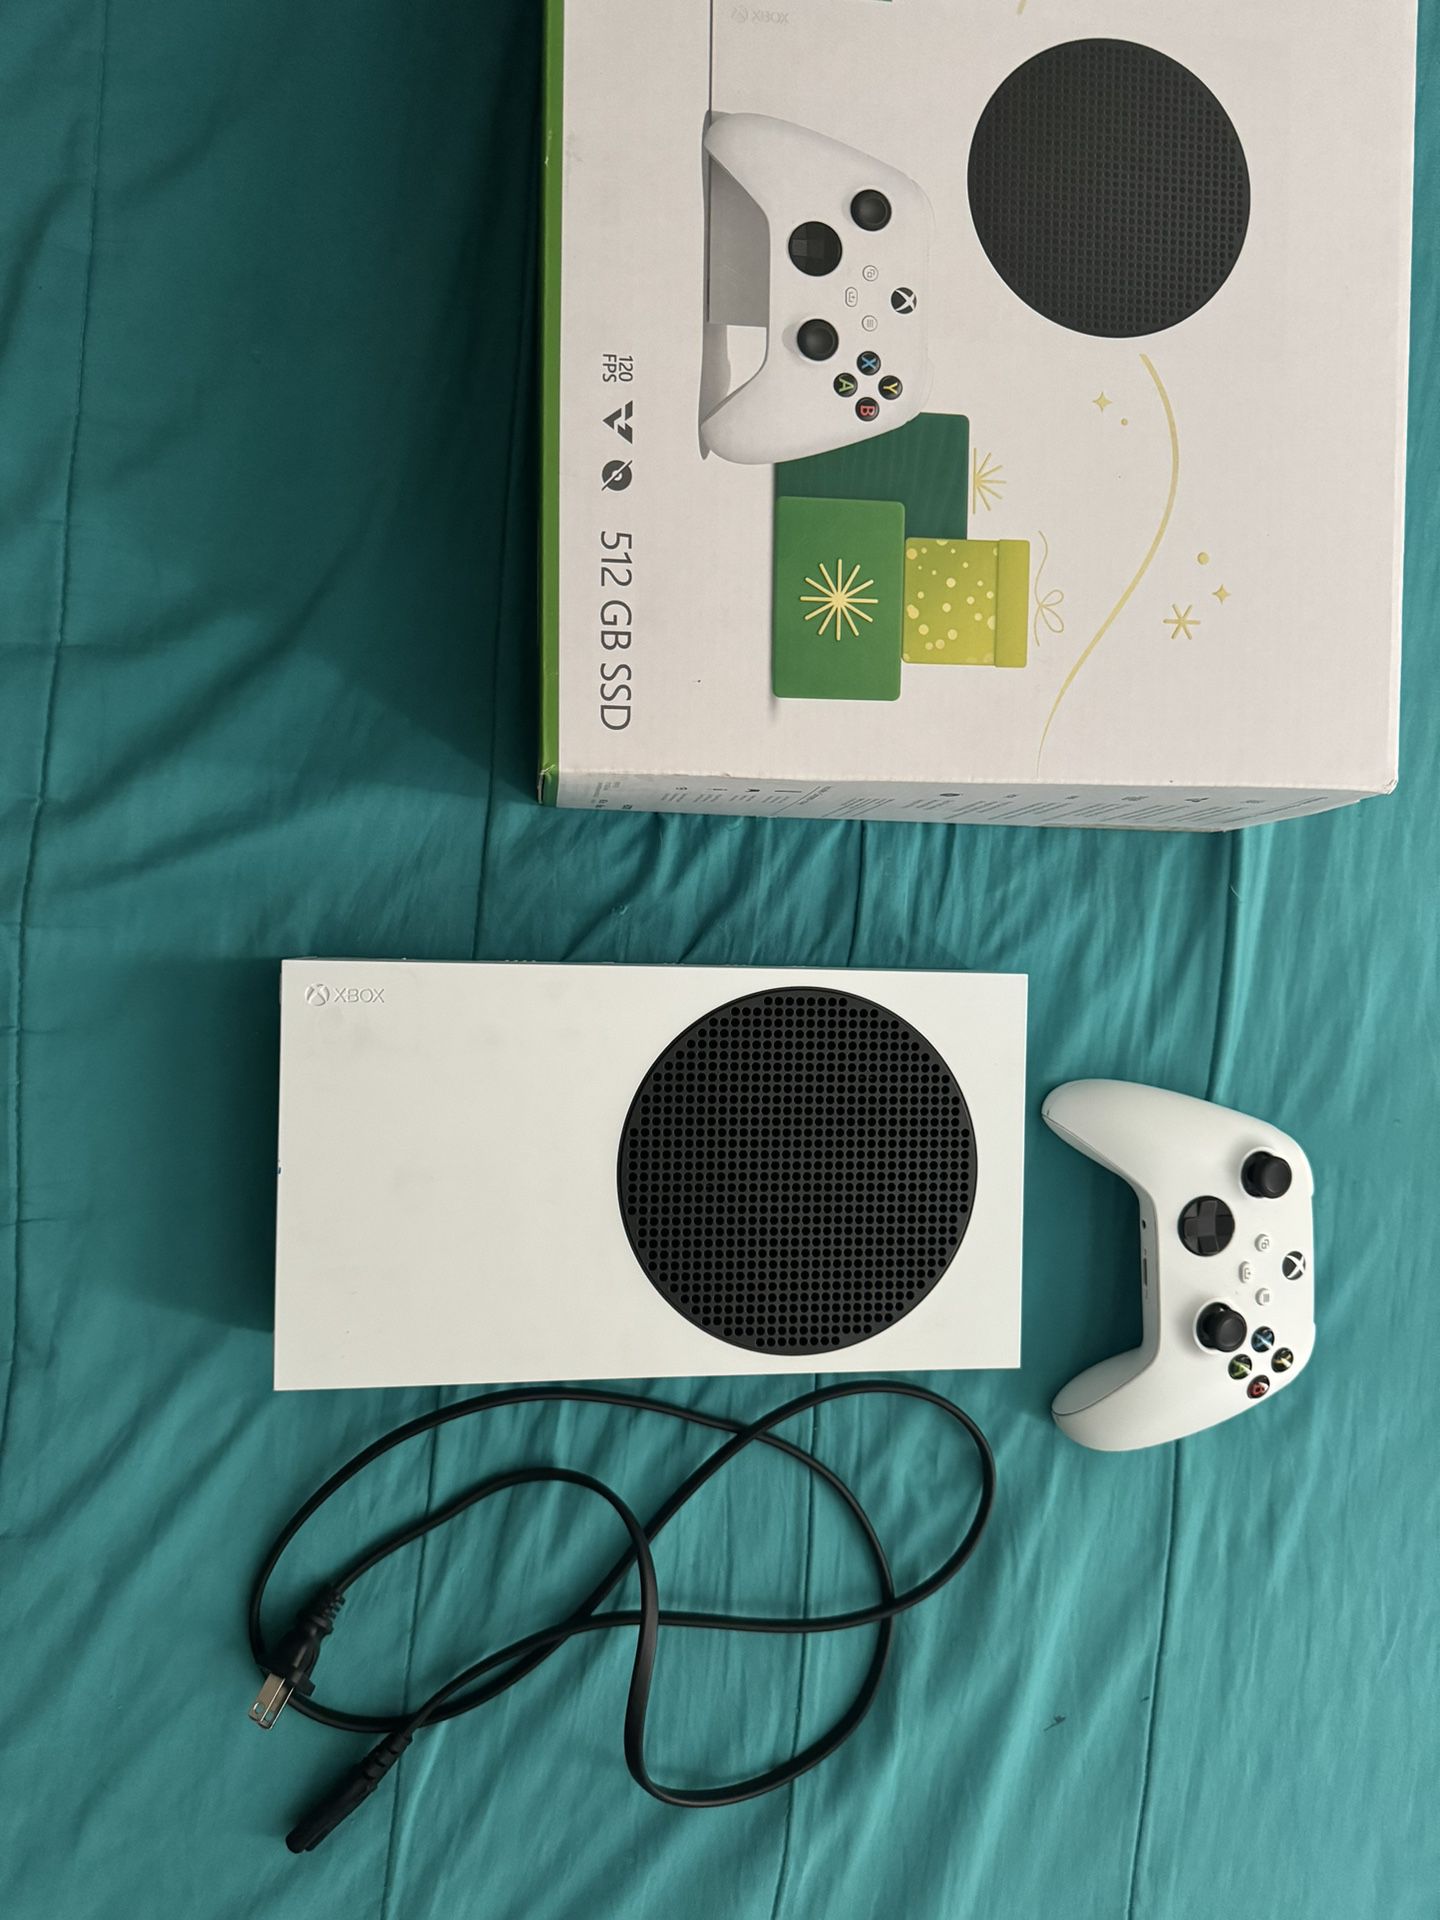 Xbox Series s And Controller